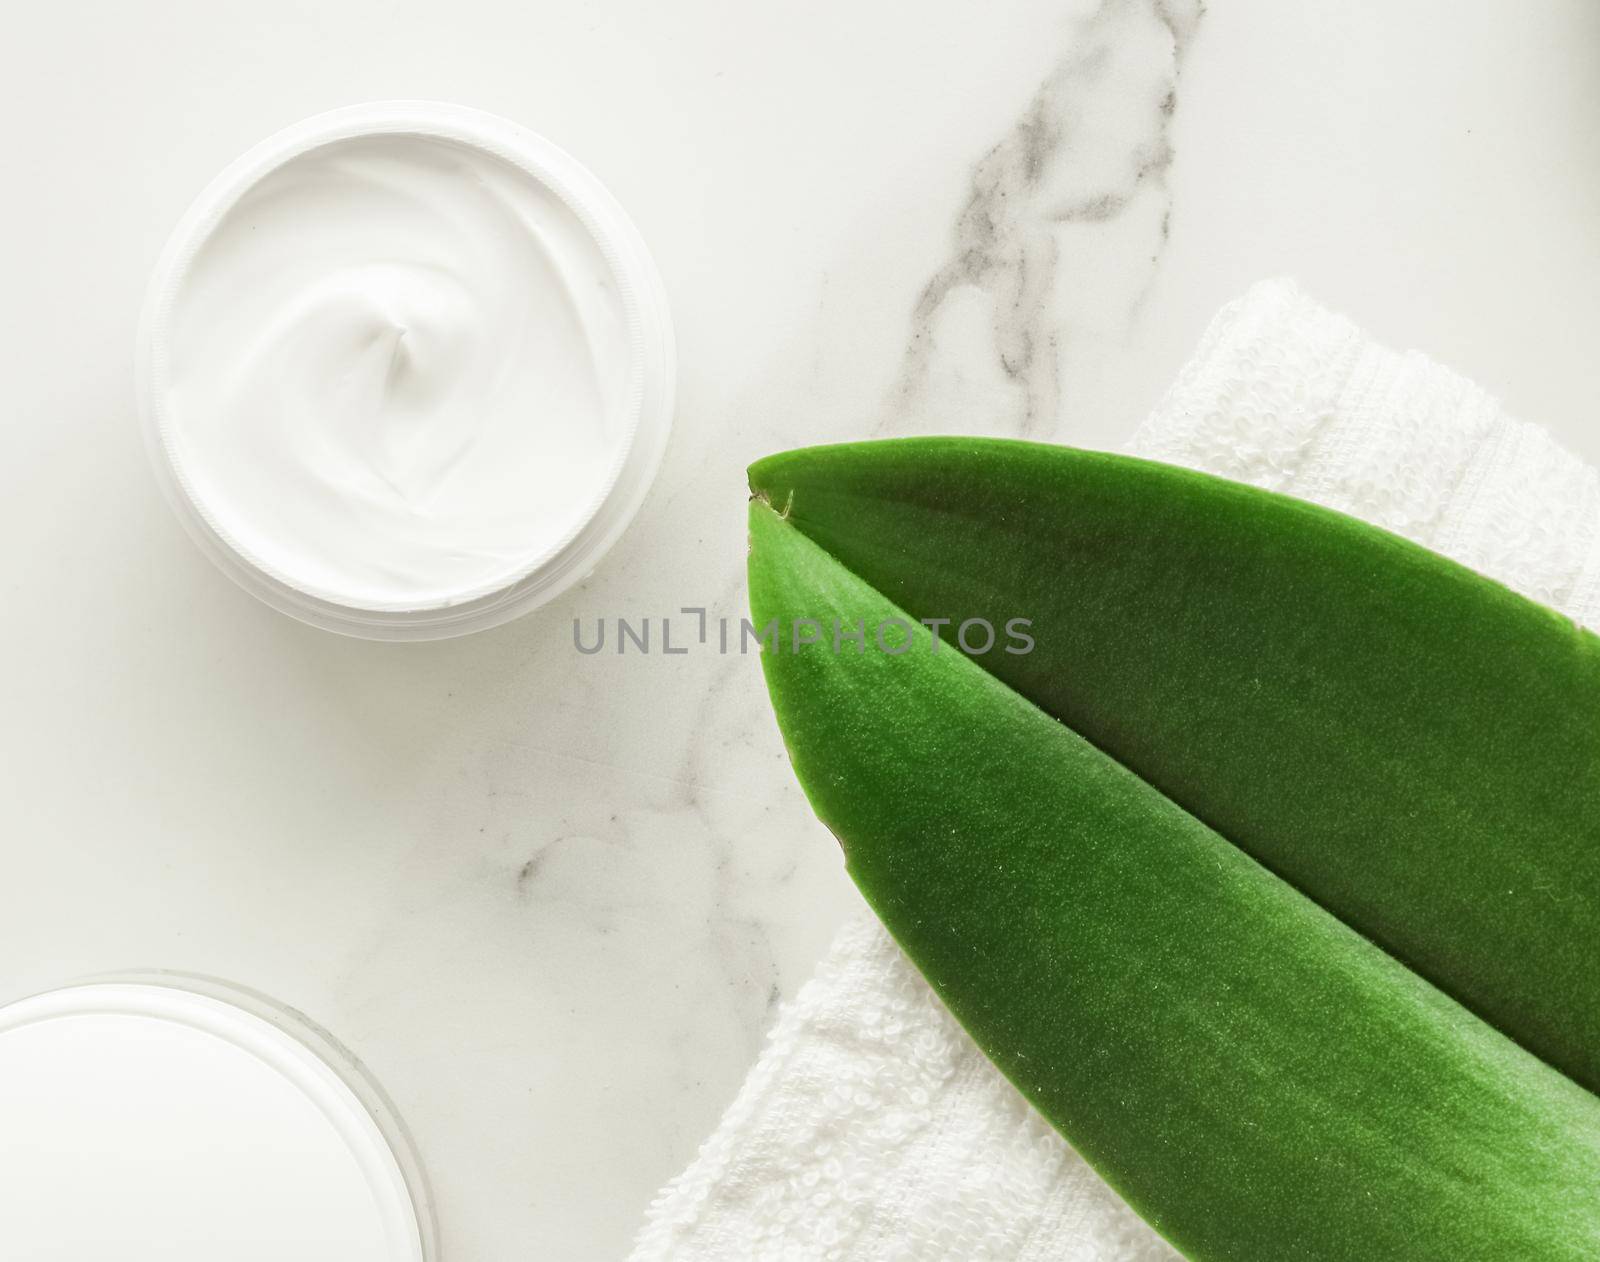 Anti-age cream products on marble, flatlay - skincare and body care, luxury spa and clean cosmetic concept. Beauty of an organic spa experience